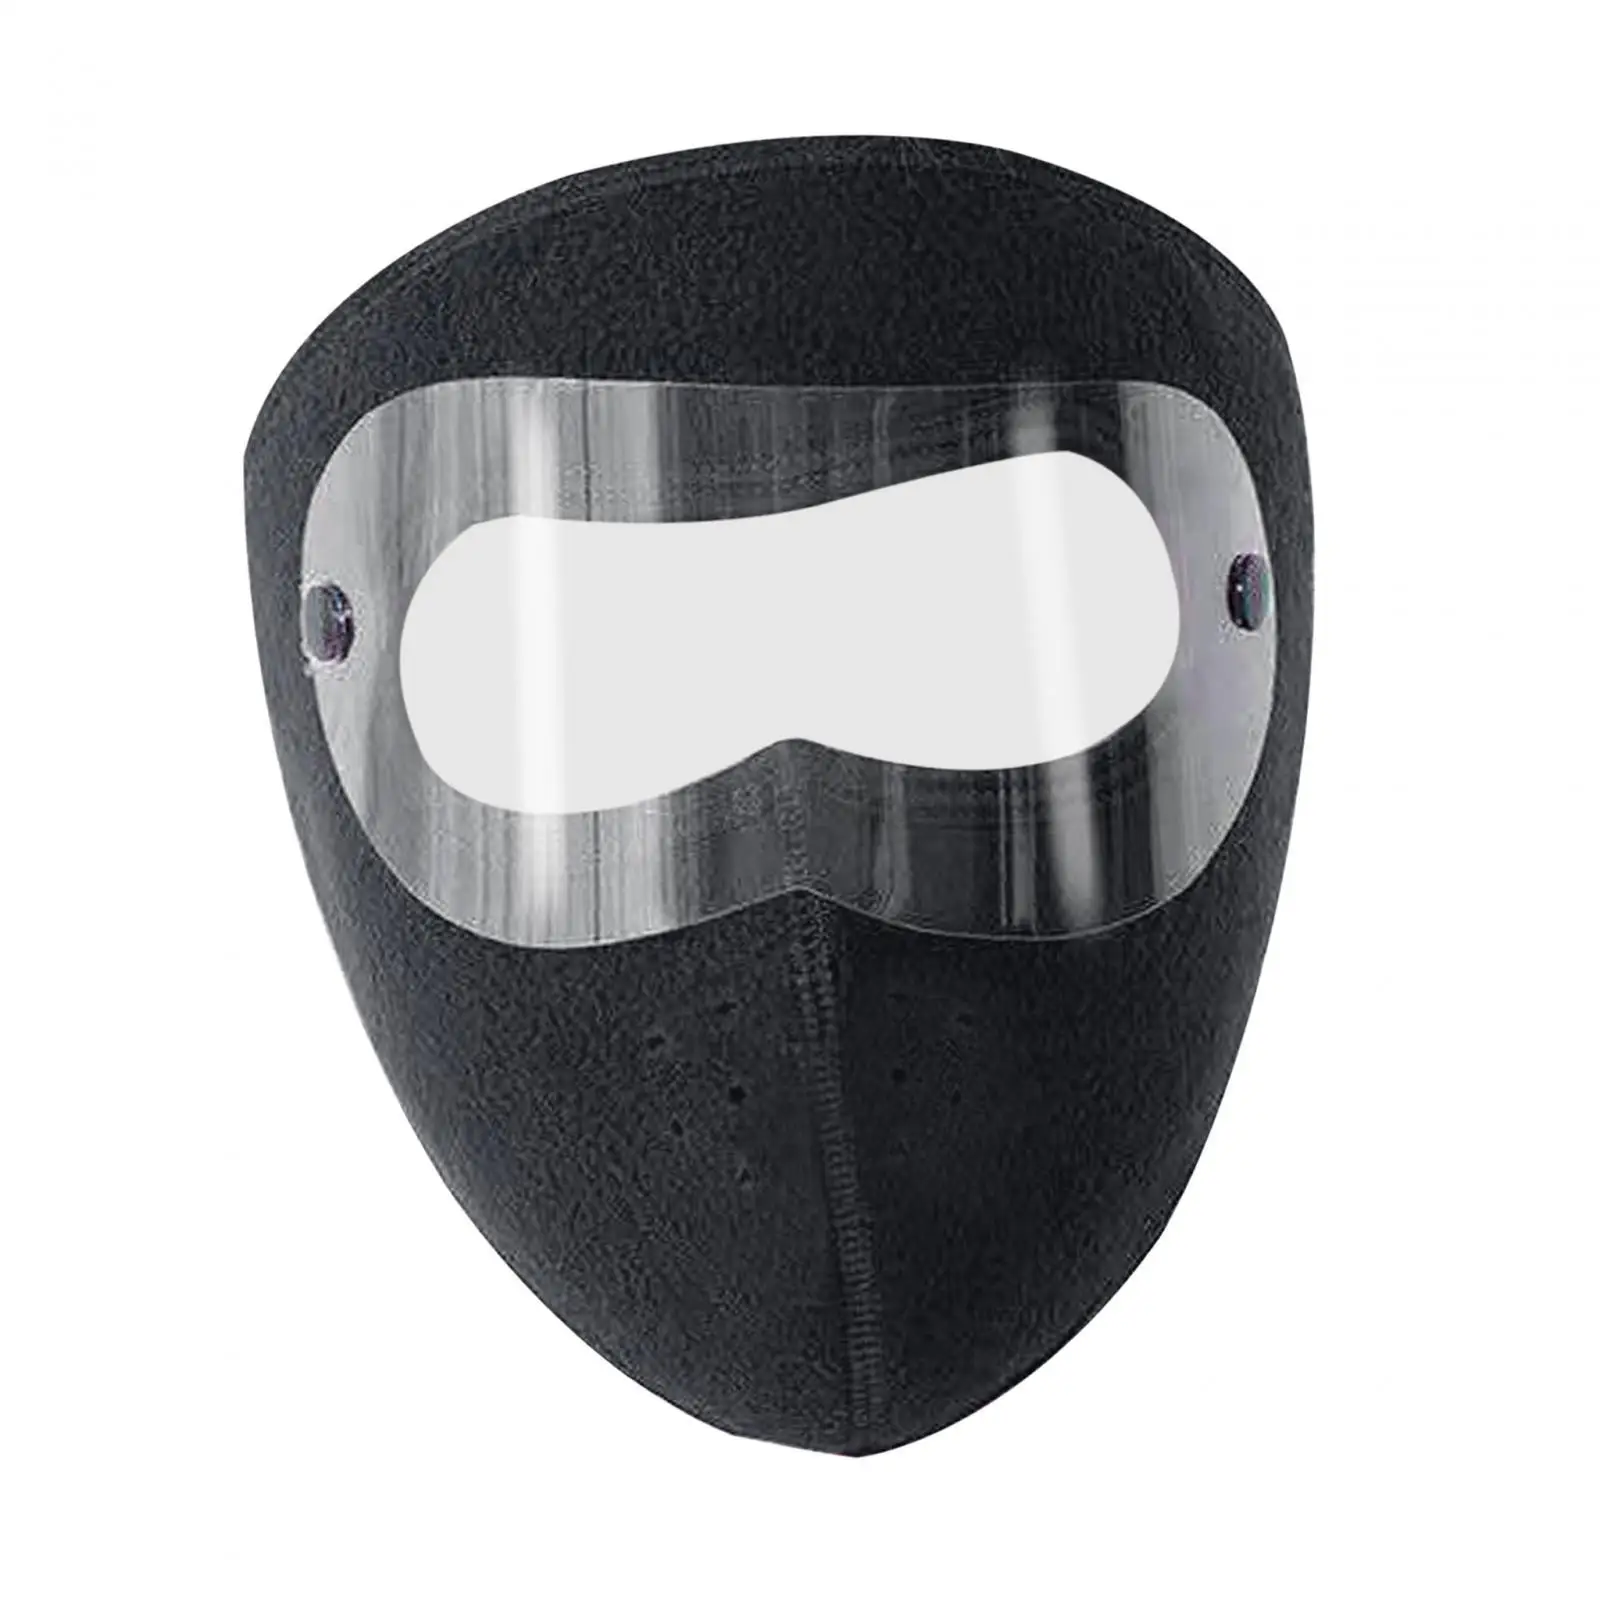 Winter Mask Windproof Ear Protection Warm Ski Mask for Skiing Cycling Sports